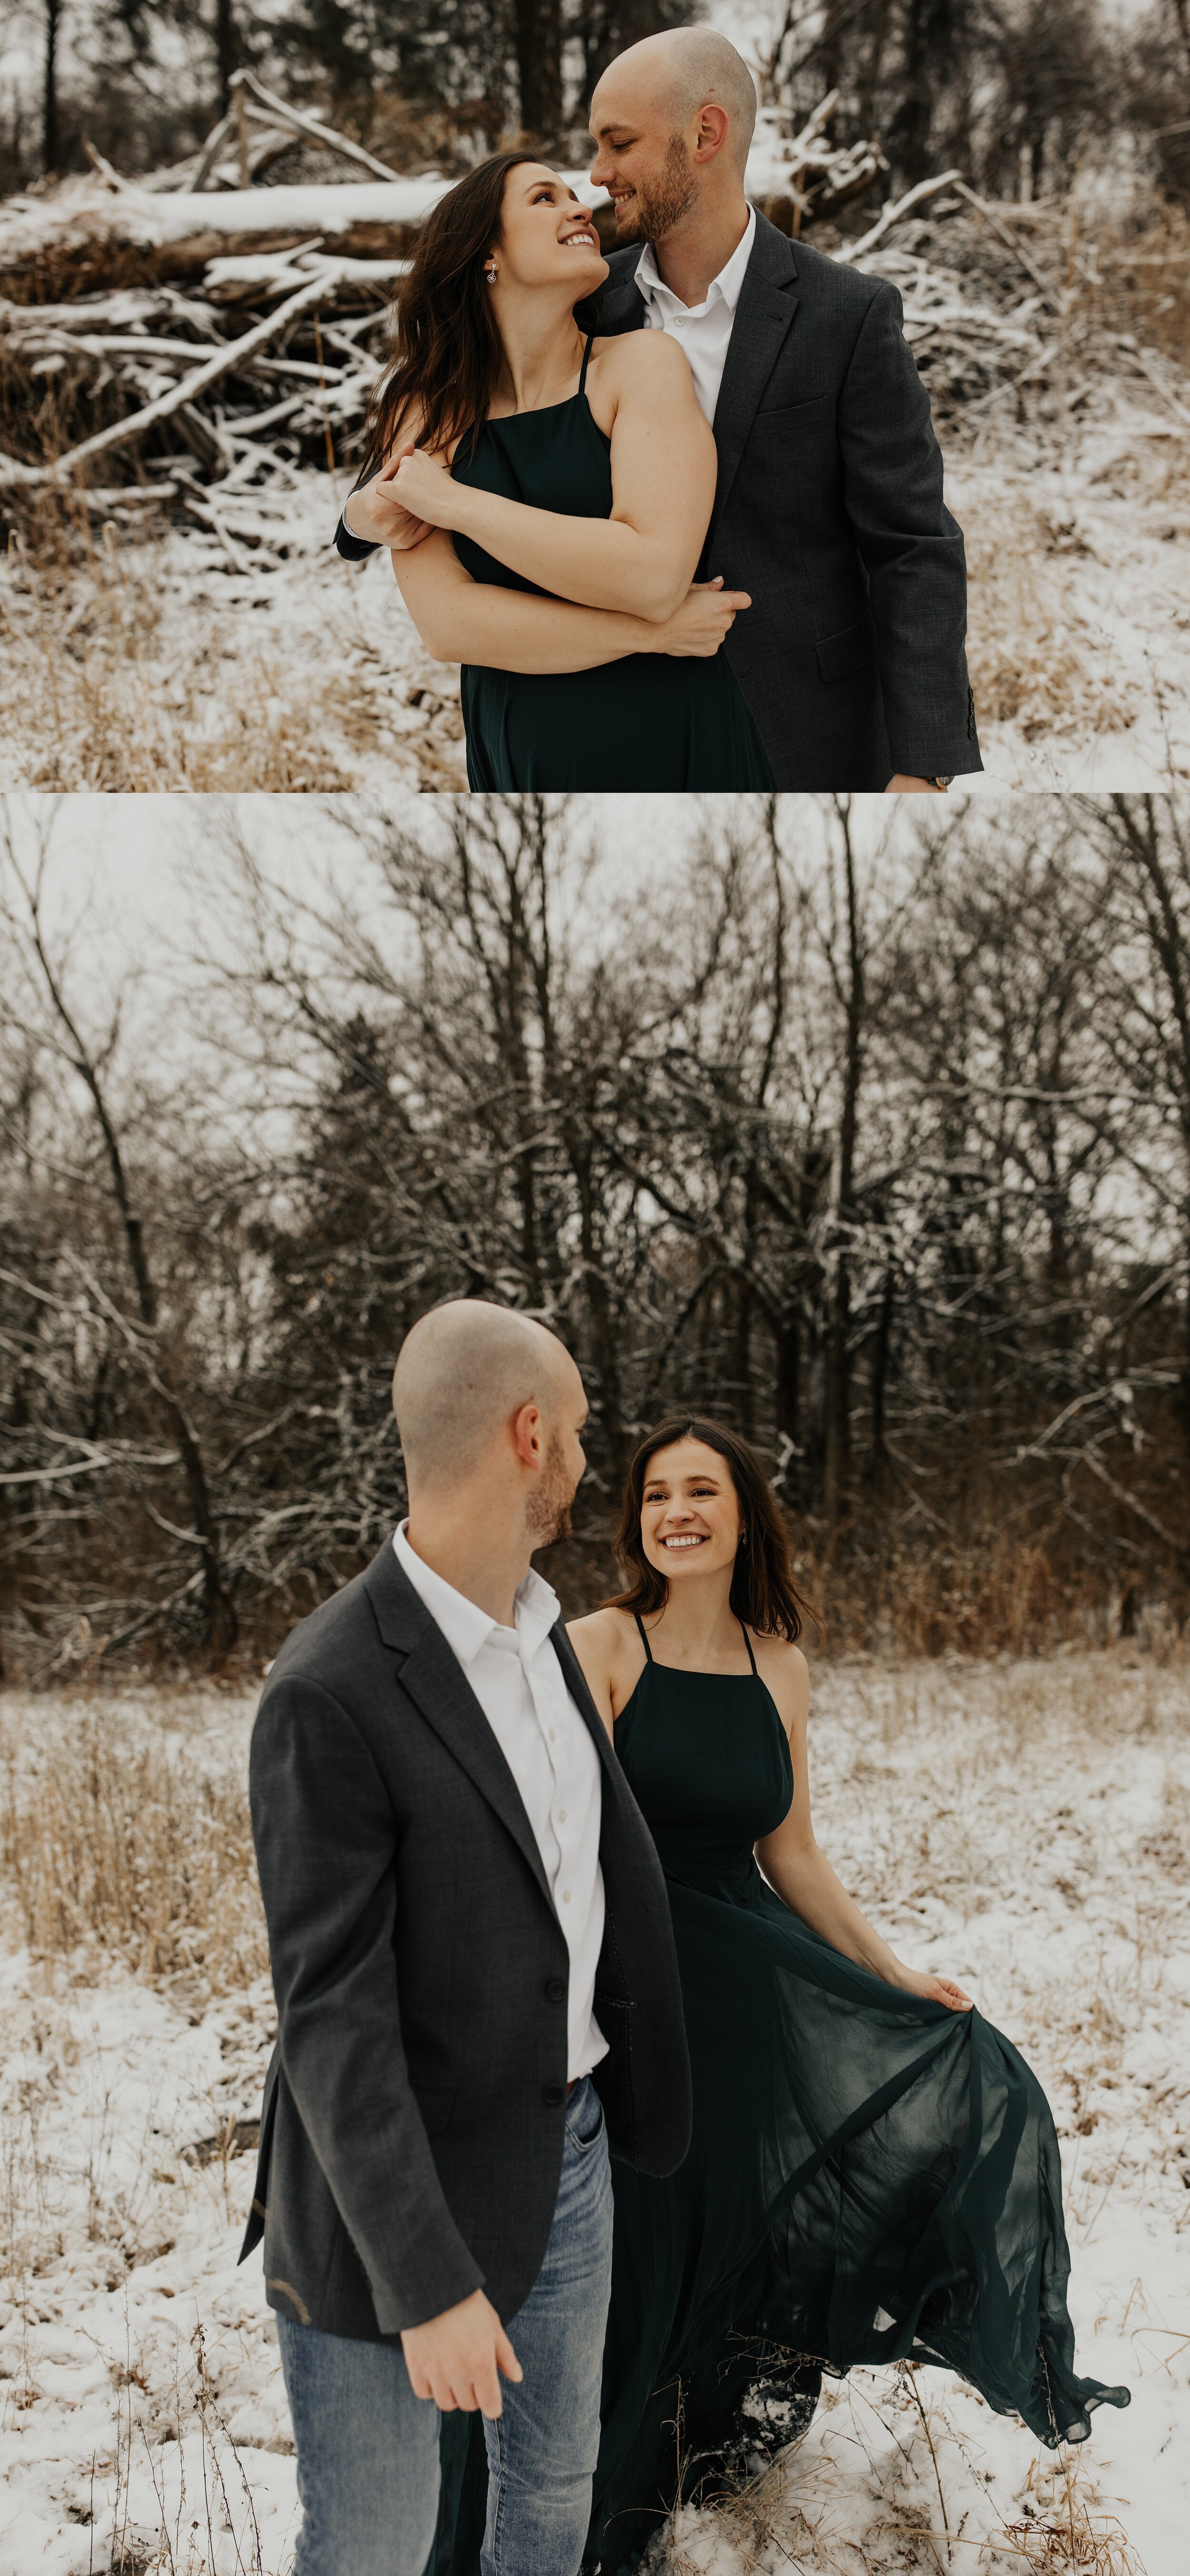 jessika-christine-photography-outdoor-engagement-couples-snow-adventurous-session (4).jpg